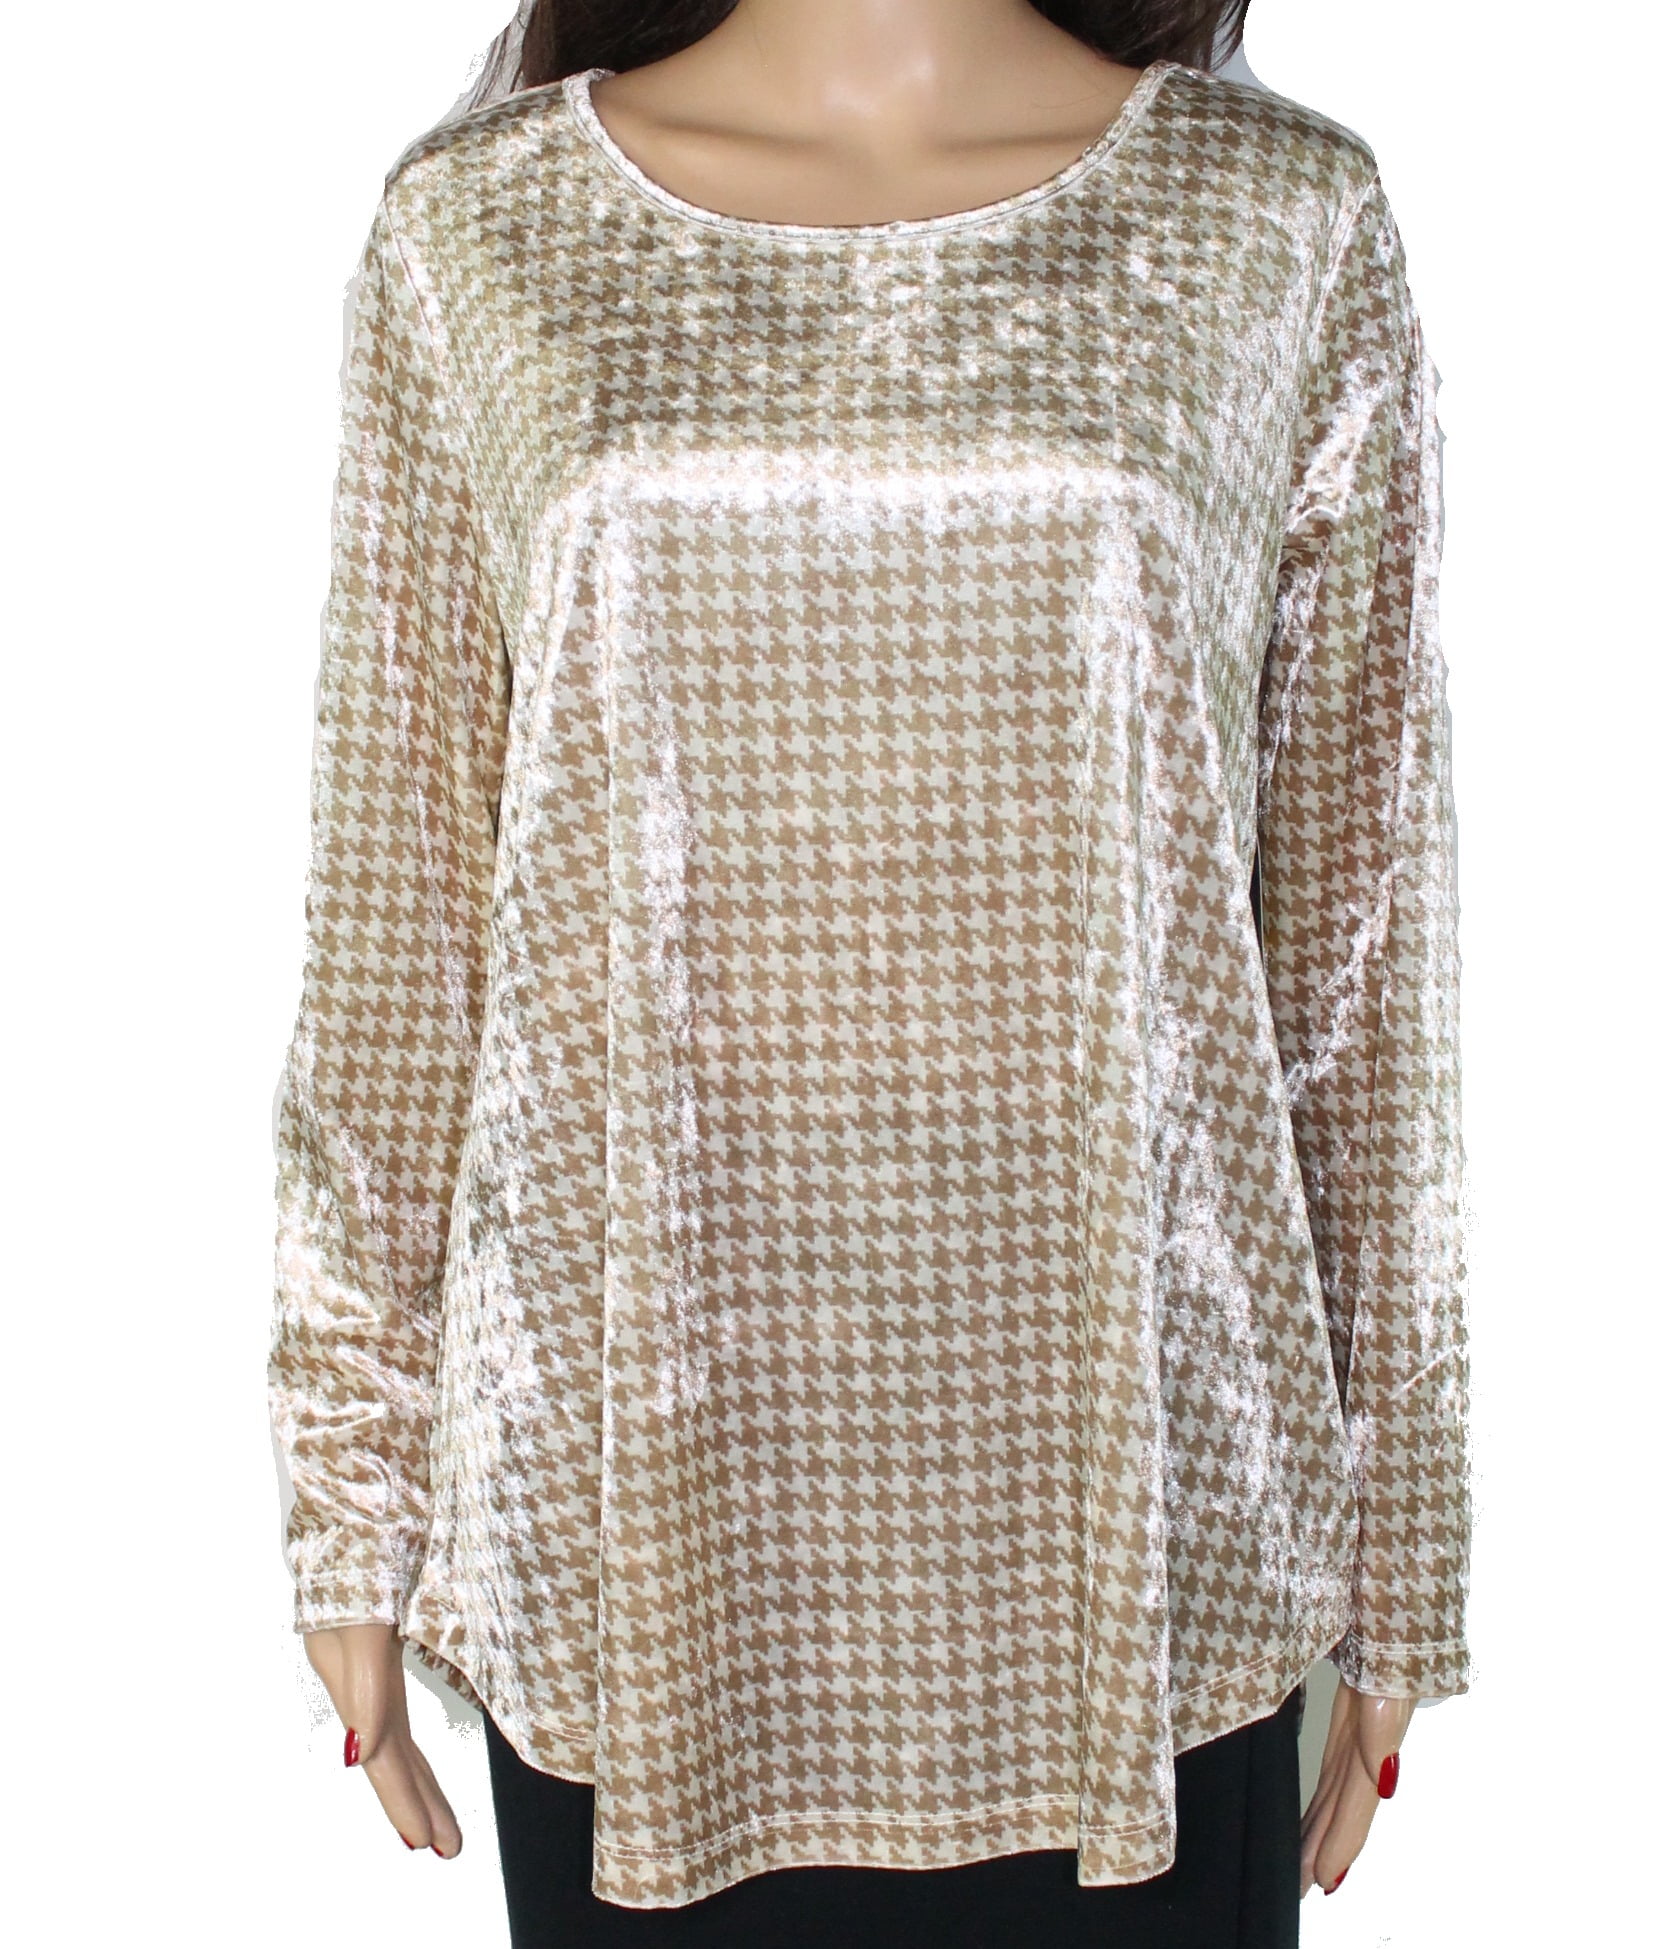 Multiples Clothing Co. Womens Tops ☀ T ...